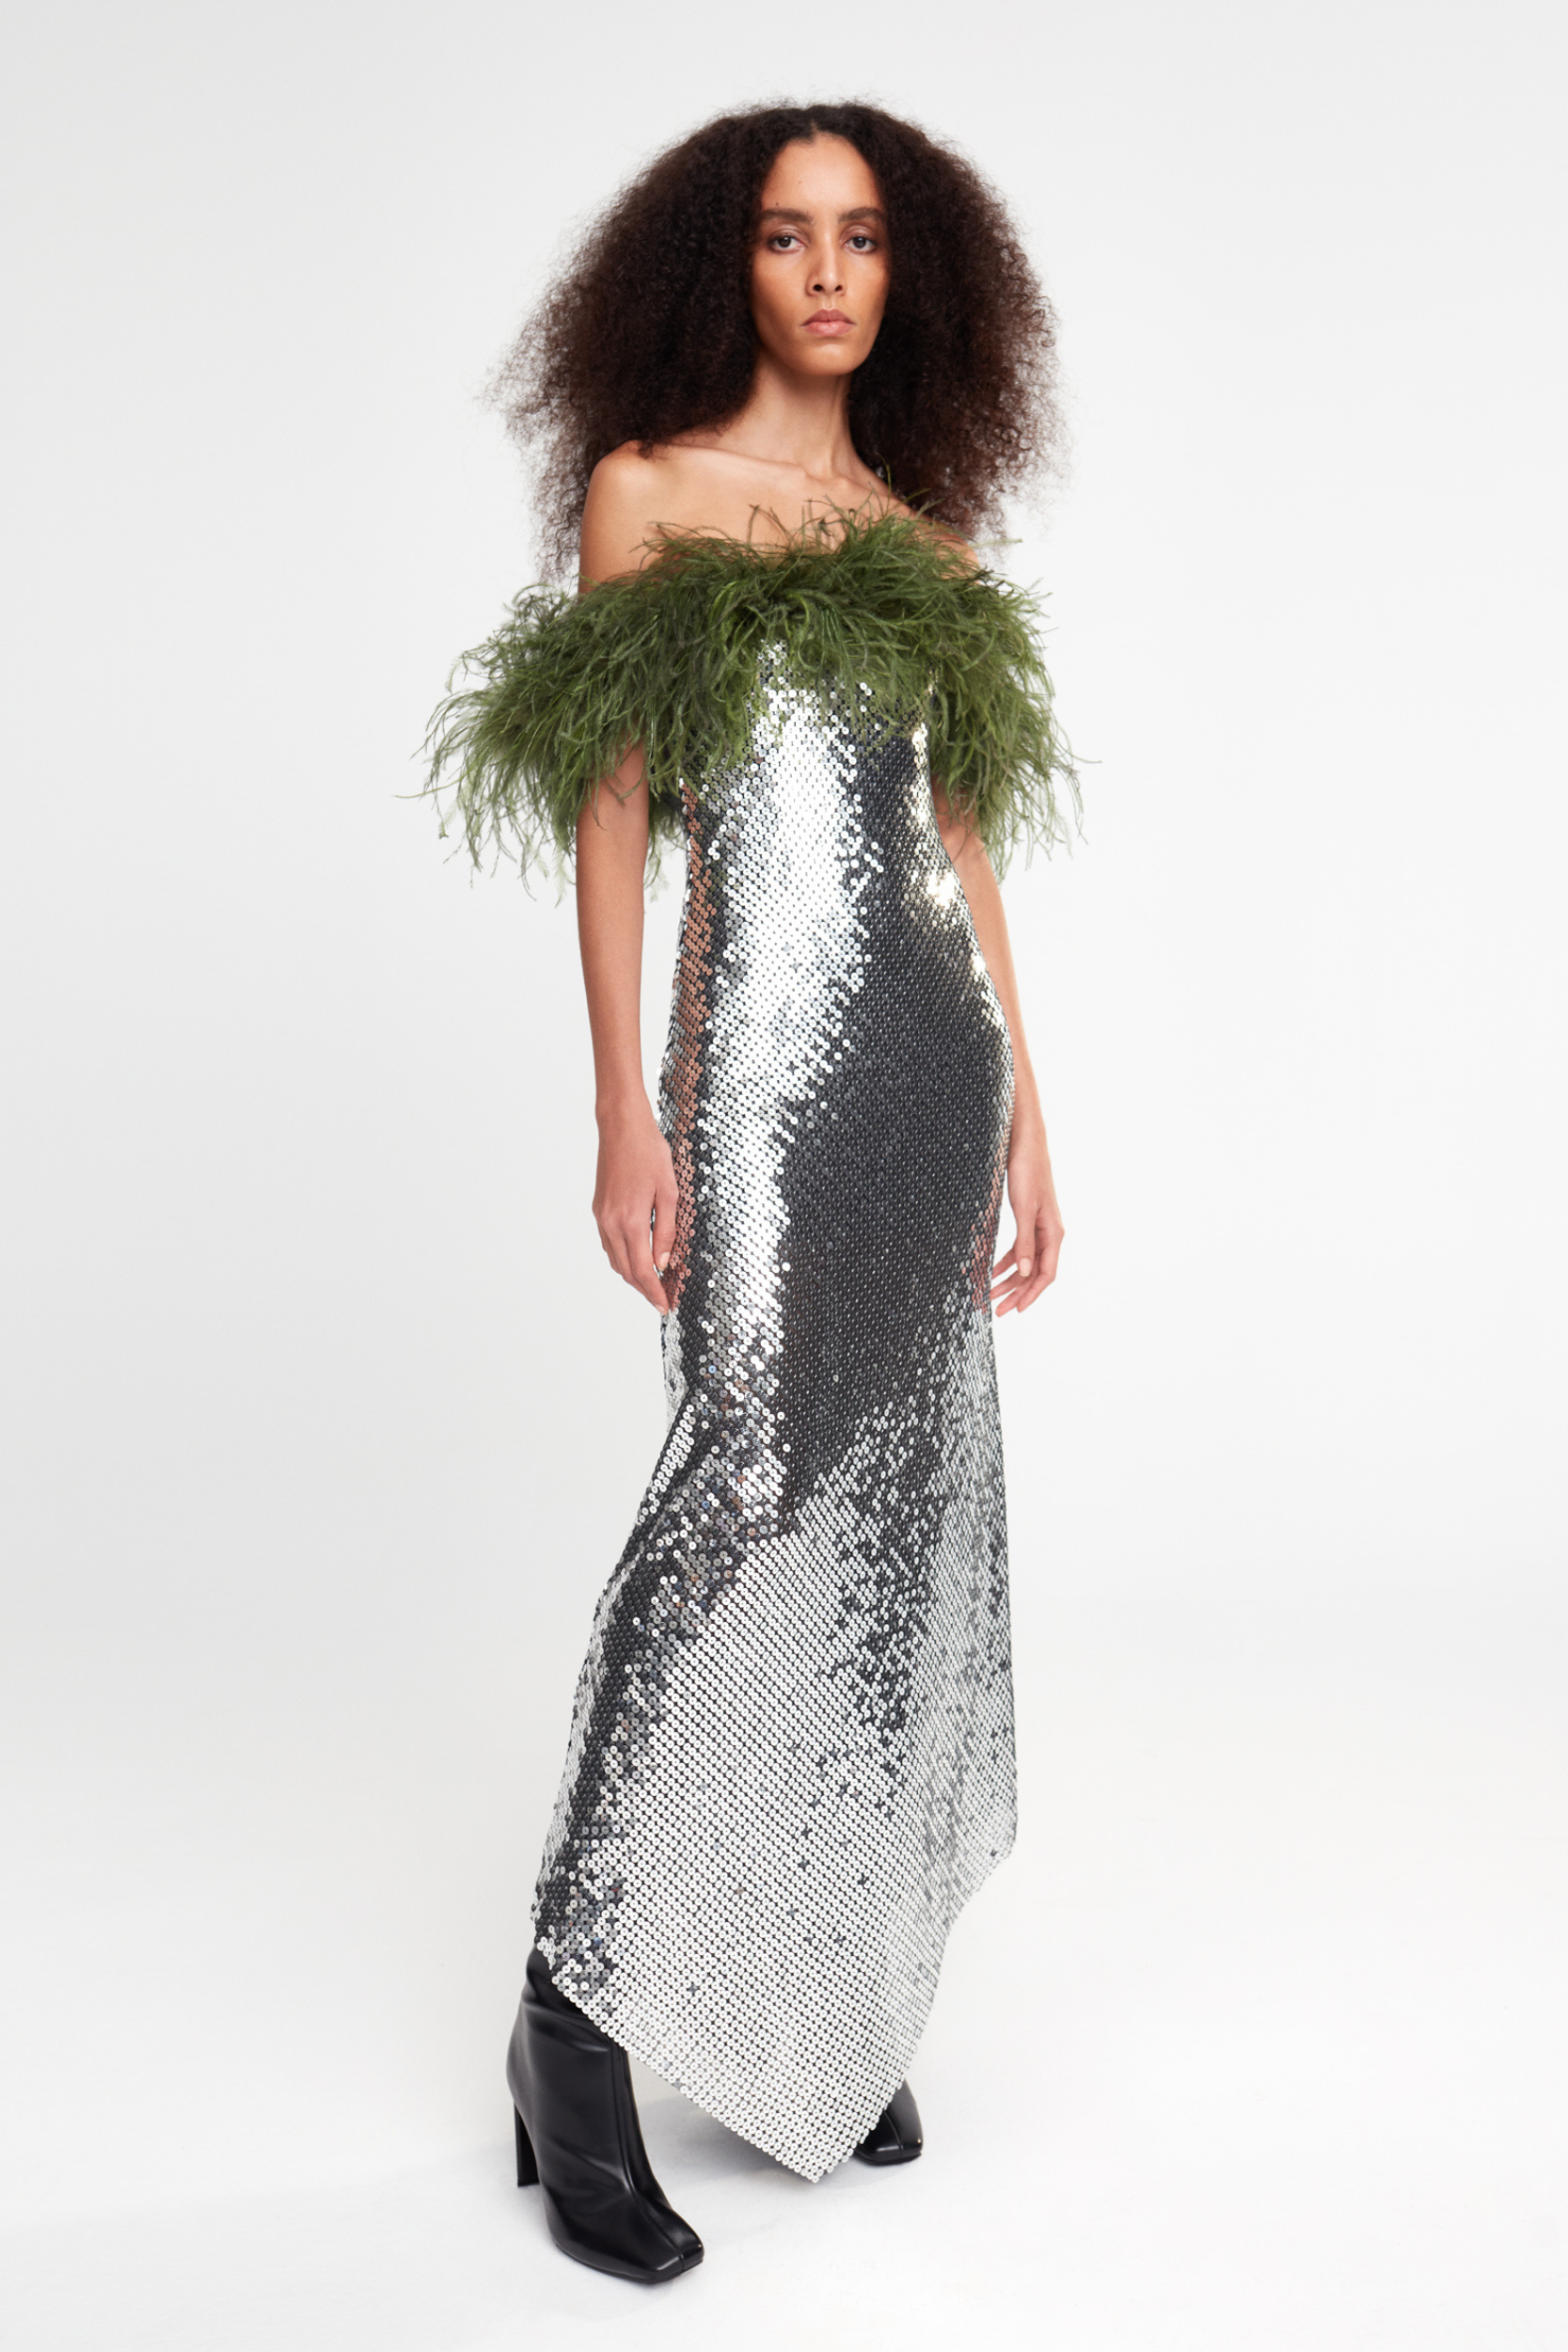 JANIS - STRAPLESS SEQUIN DRESS WITH FEATHERS